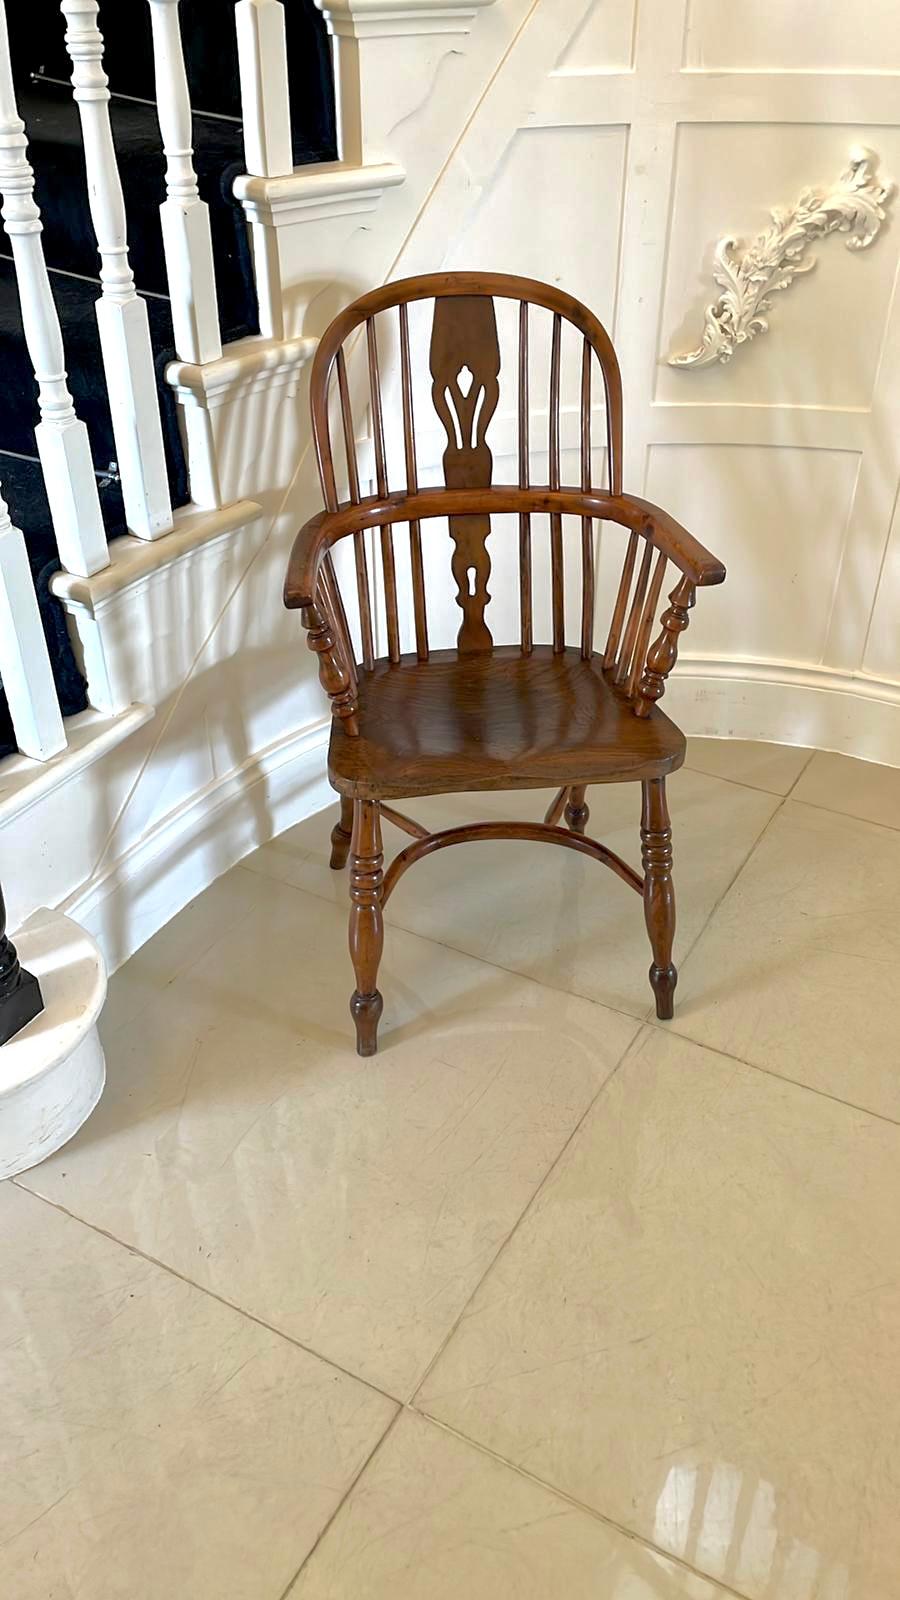  Antique George III Quality Child’s Yew Wood Windsor Chair In Good Condition For Sale In Suffolk, GB